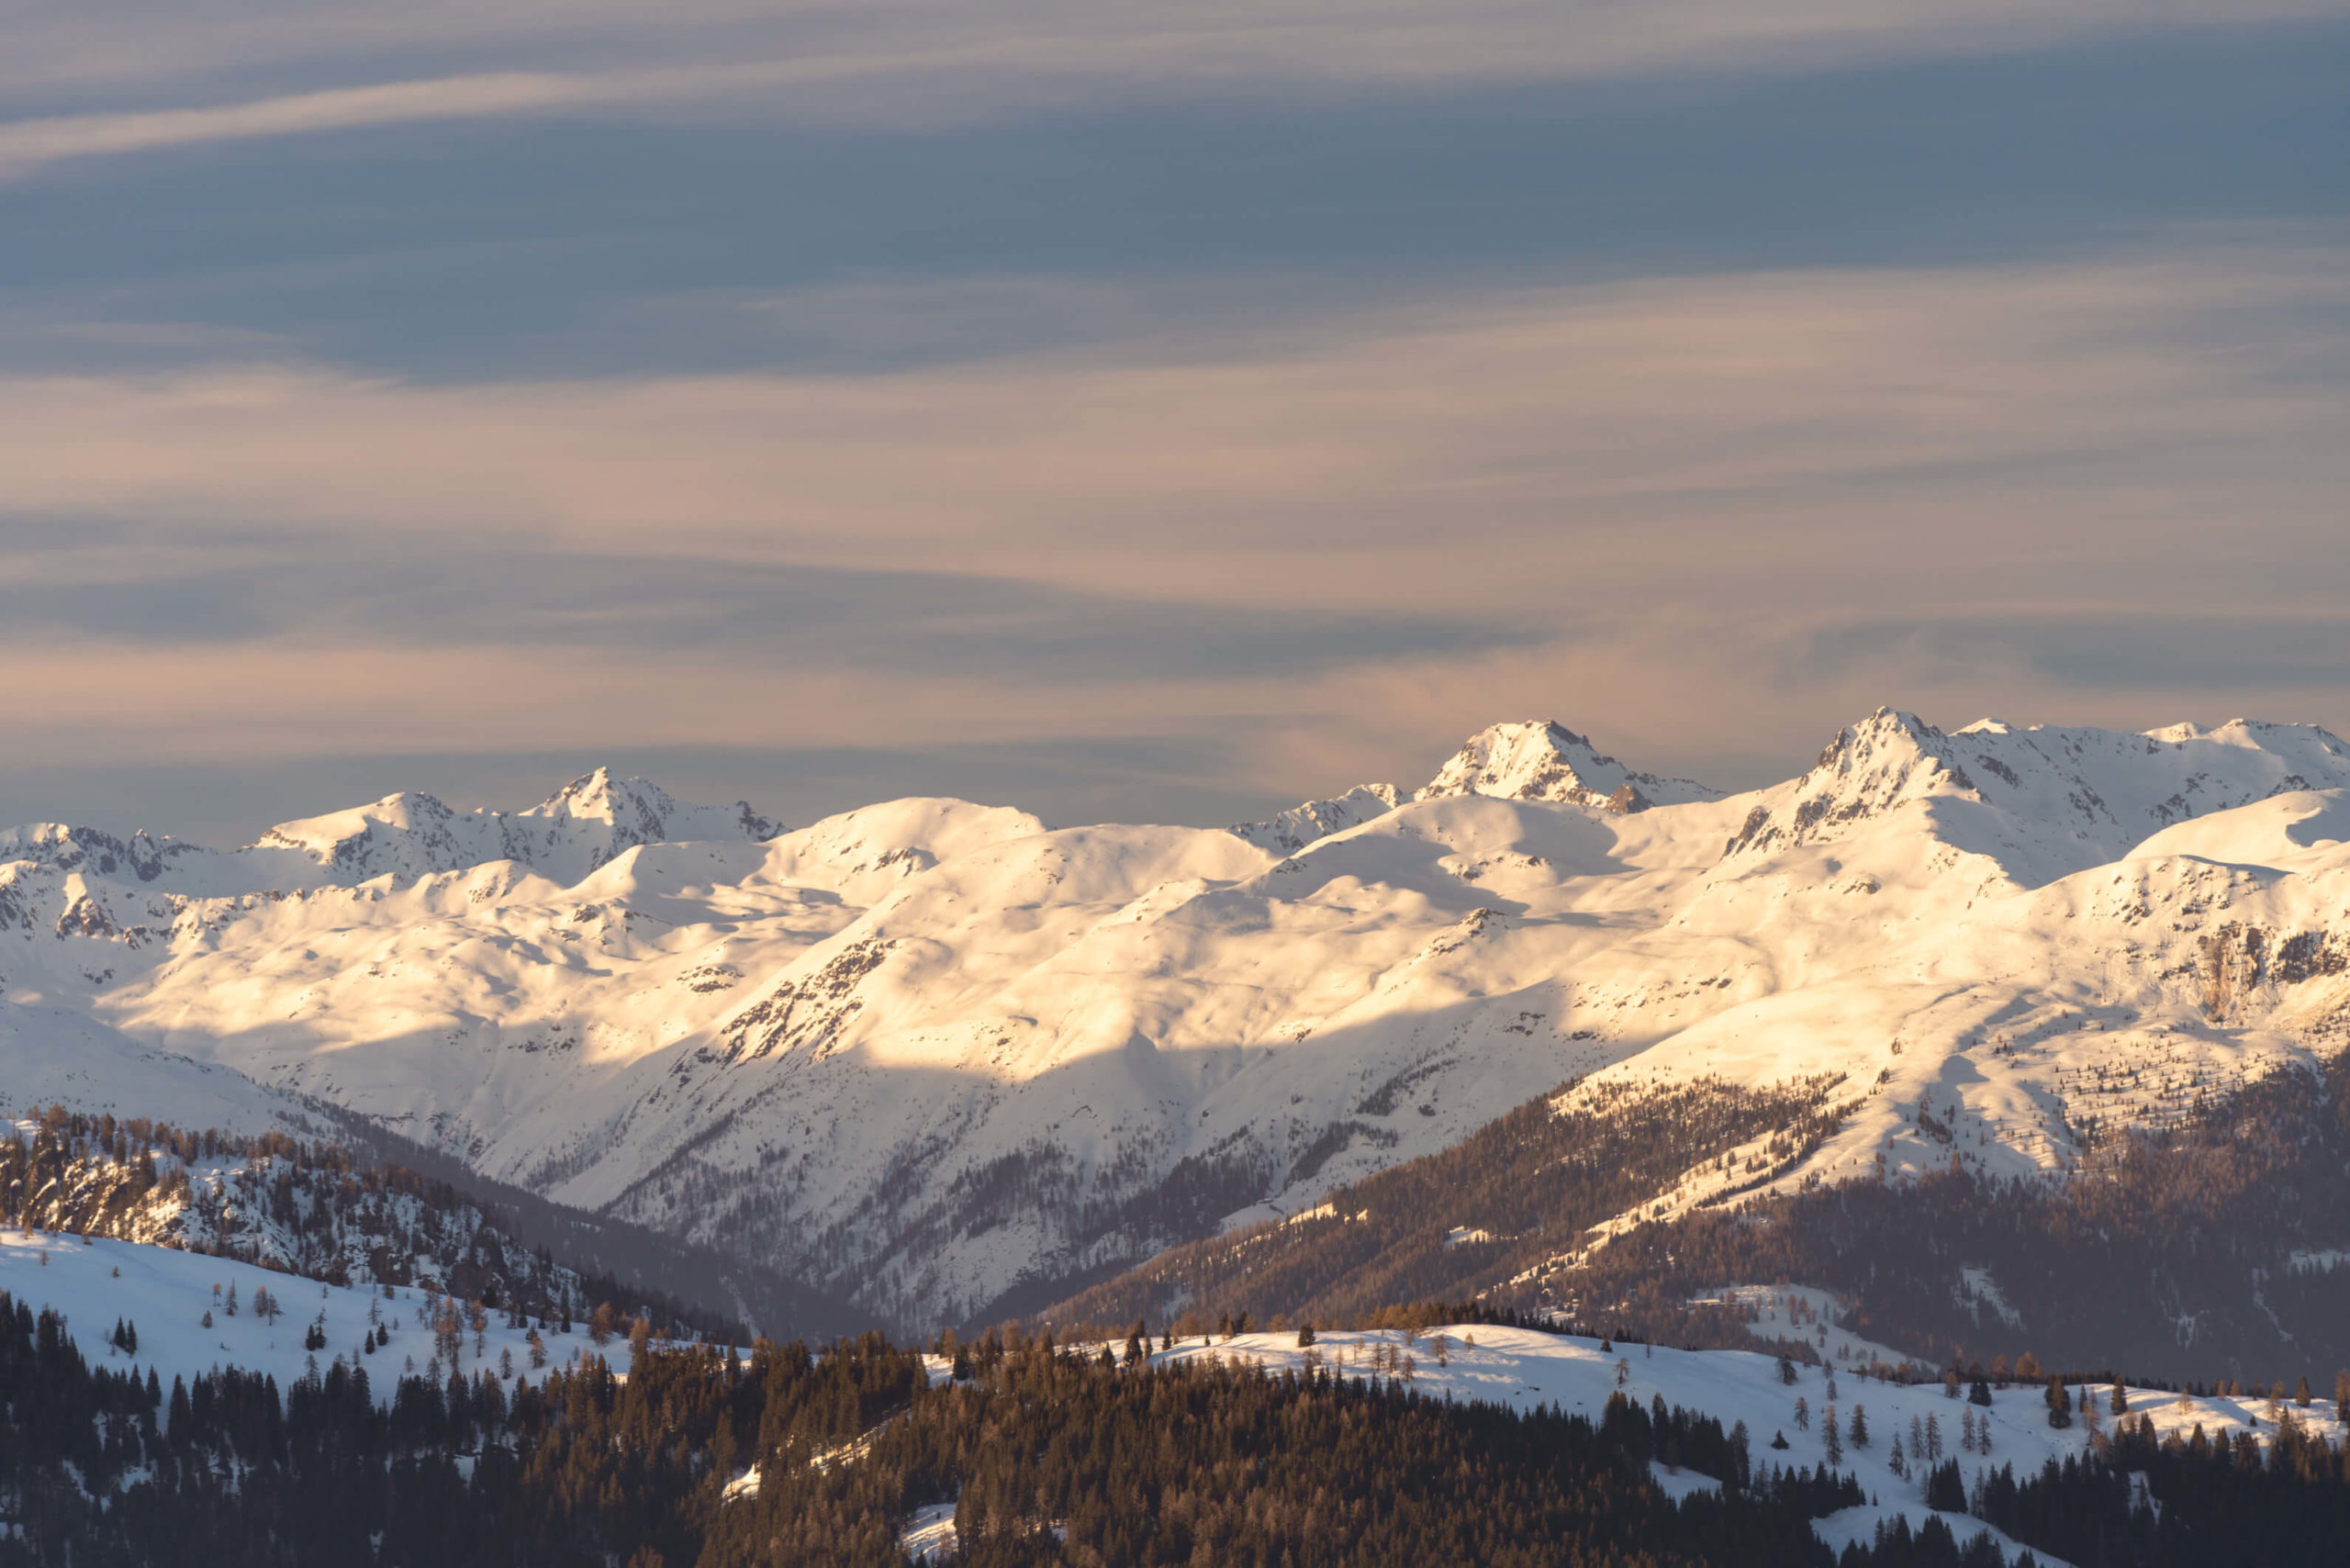 Snow covered peaks from Nassfeld lit up by warm light, Carinthia